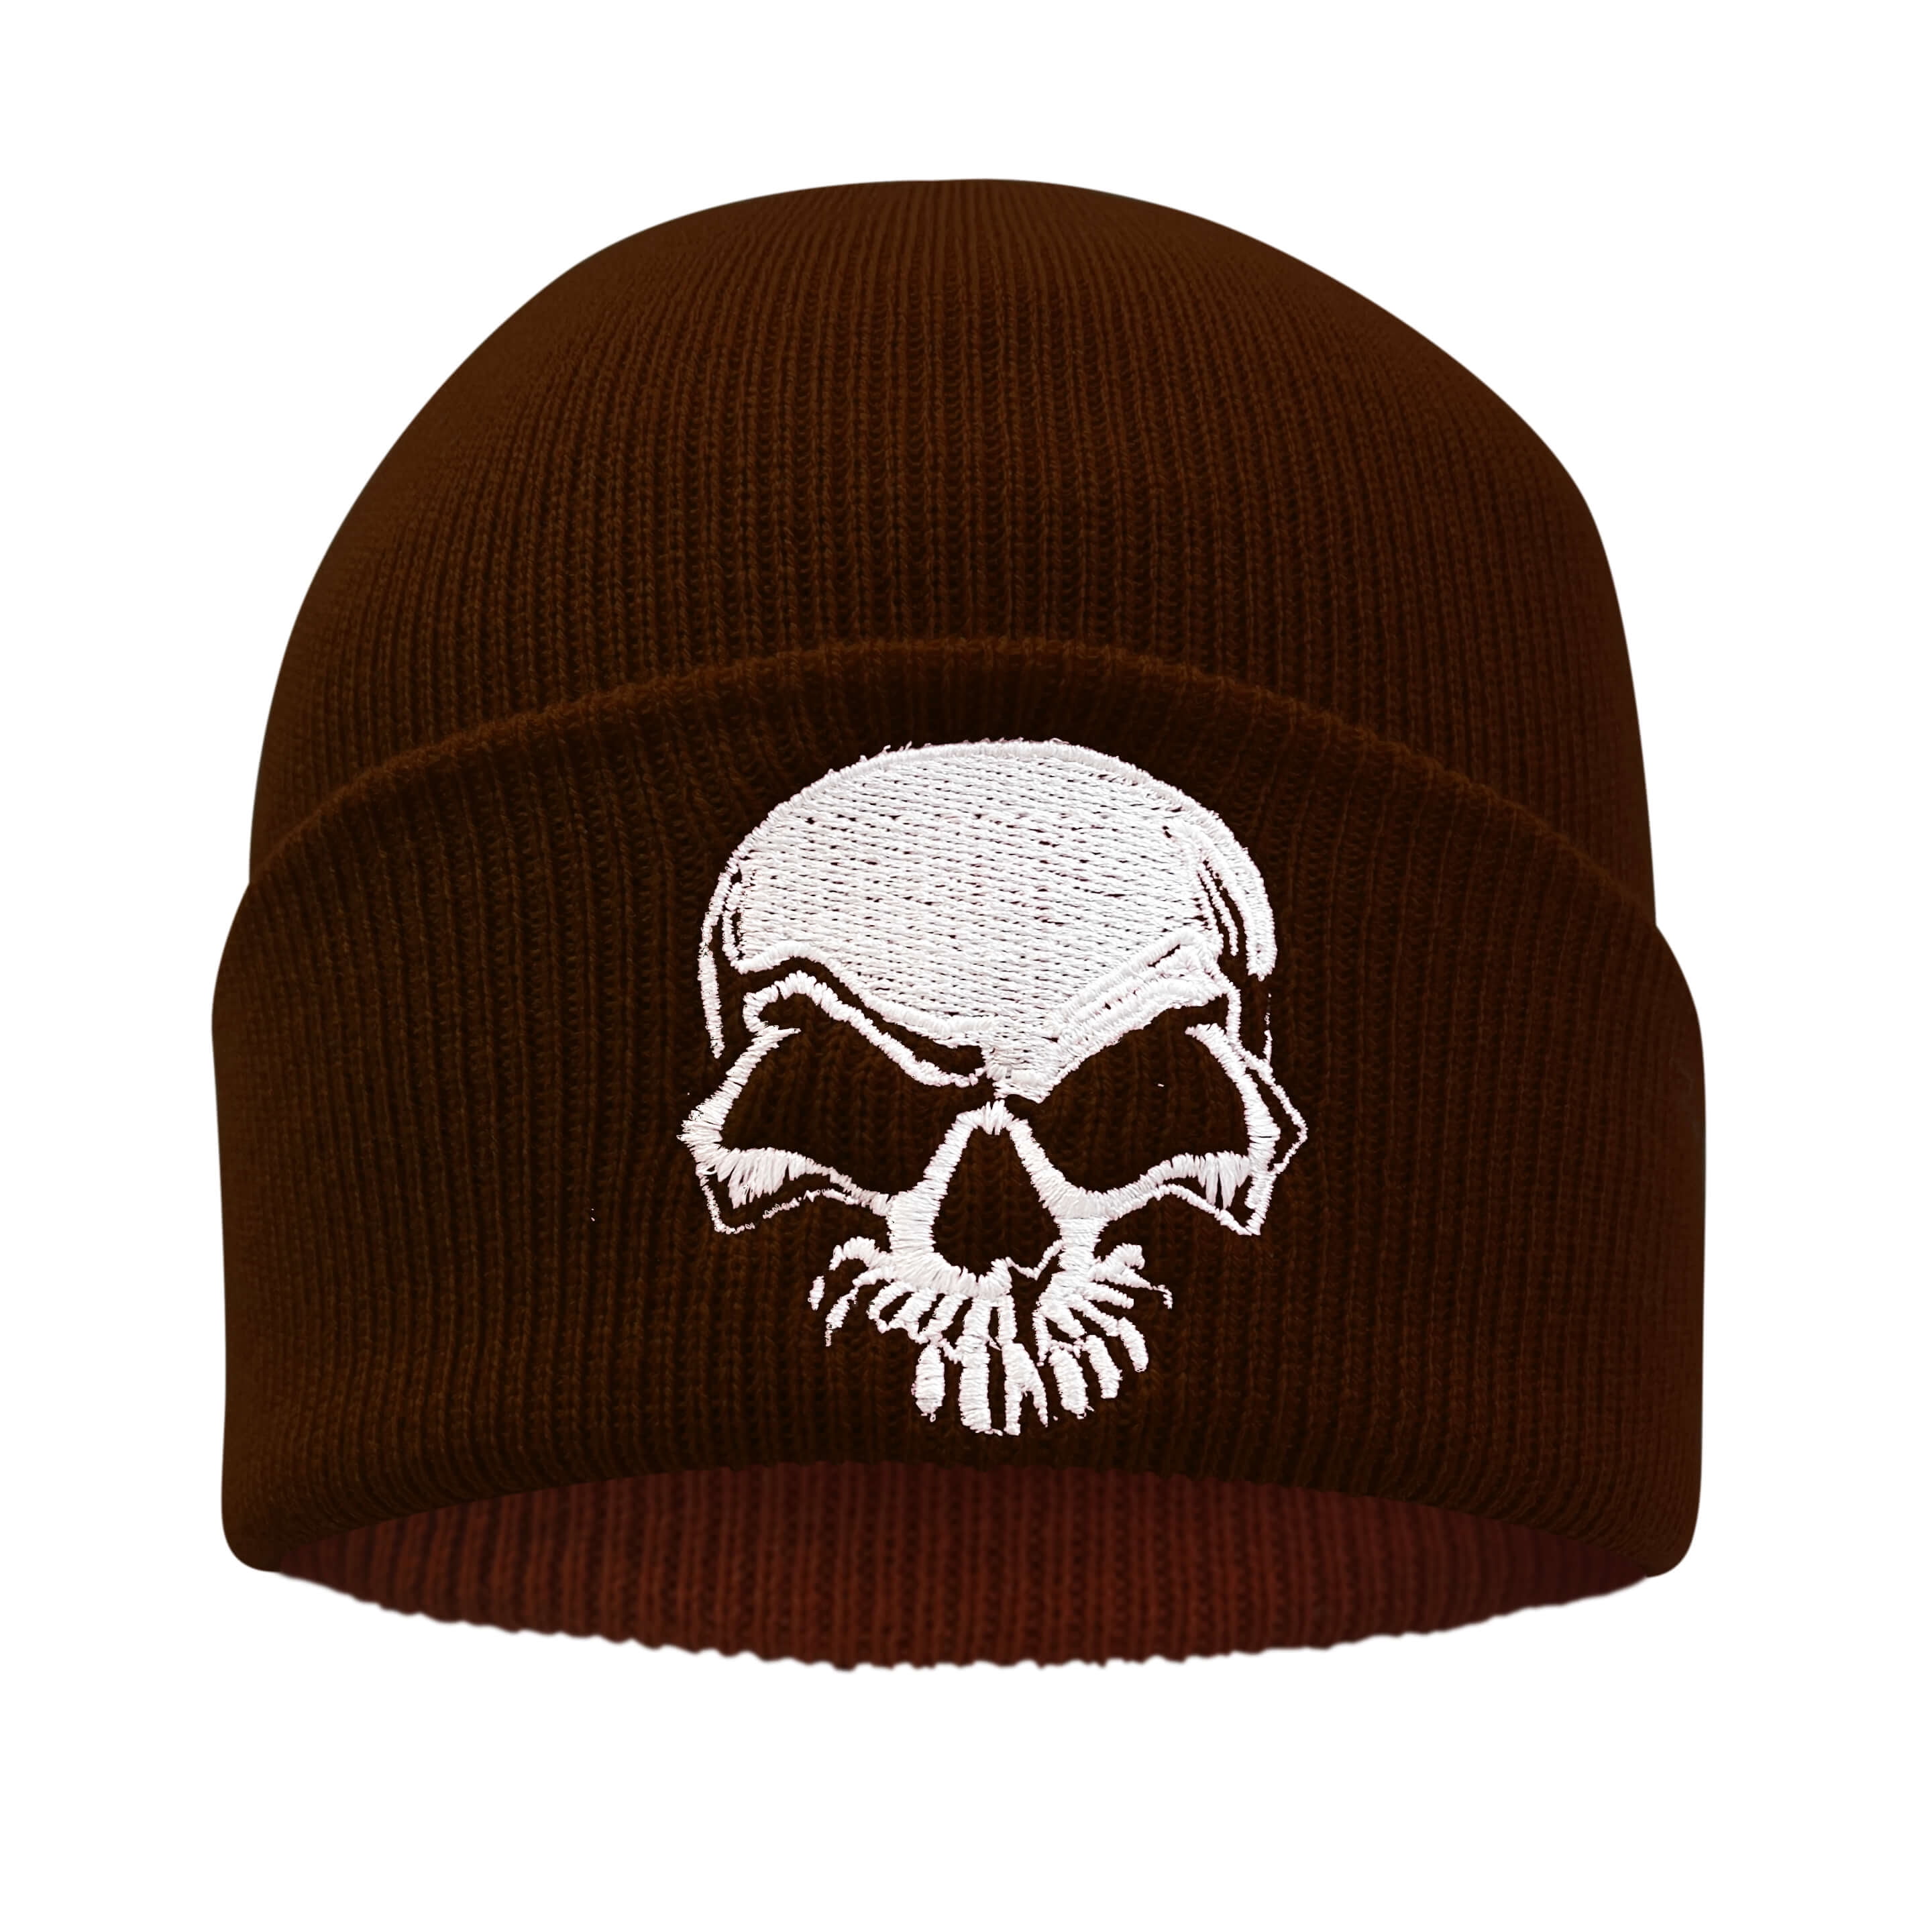 Stretchy Soft Unisex Adult Knited Beanie Hat With Multi-color Embroidered  Design Skull, Brown With White Skull